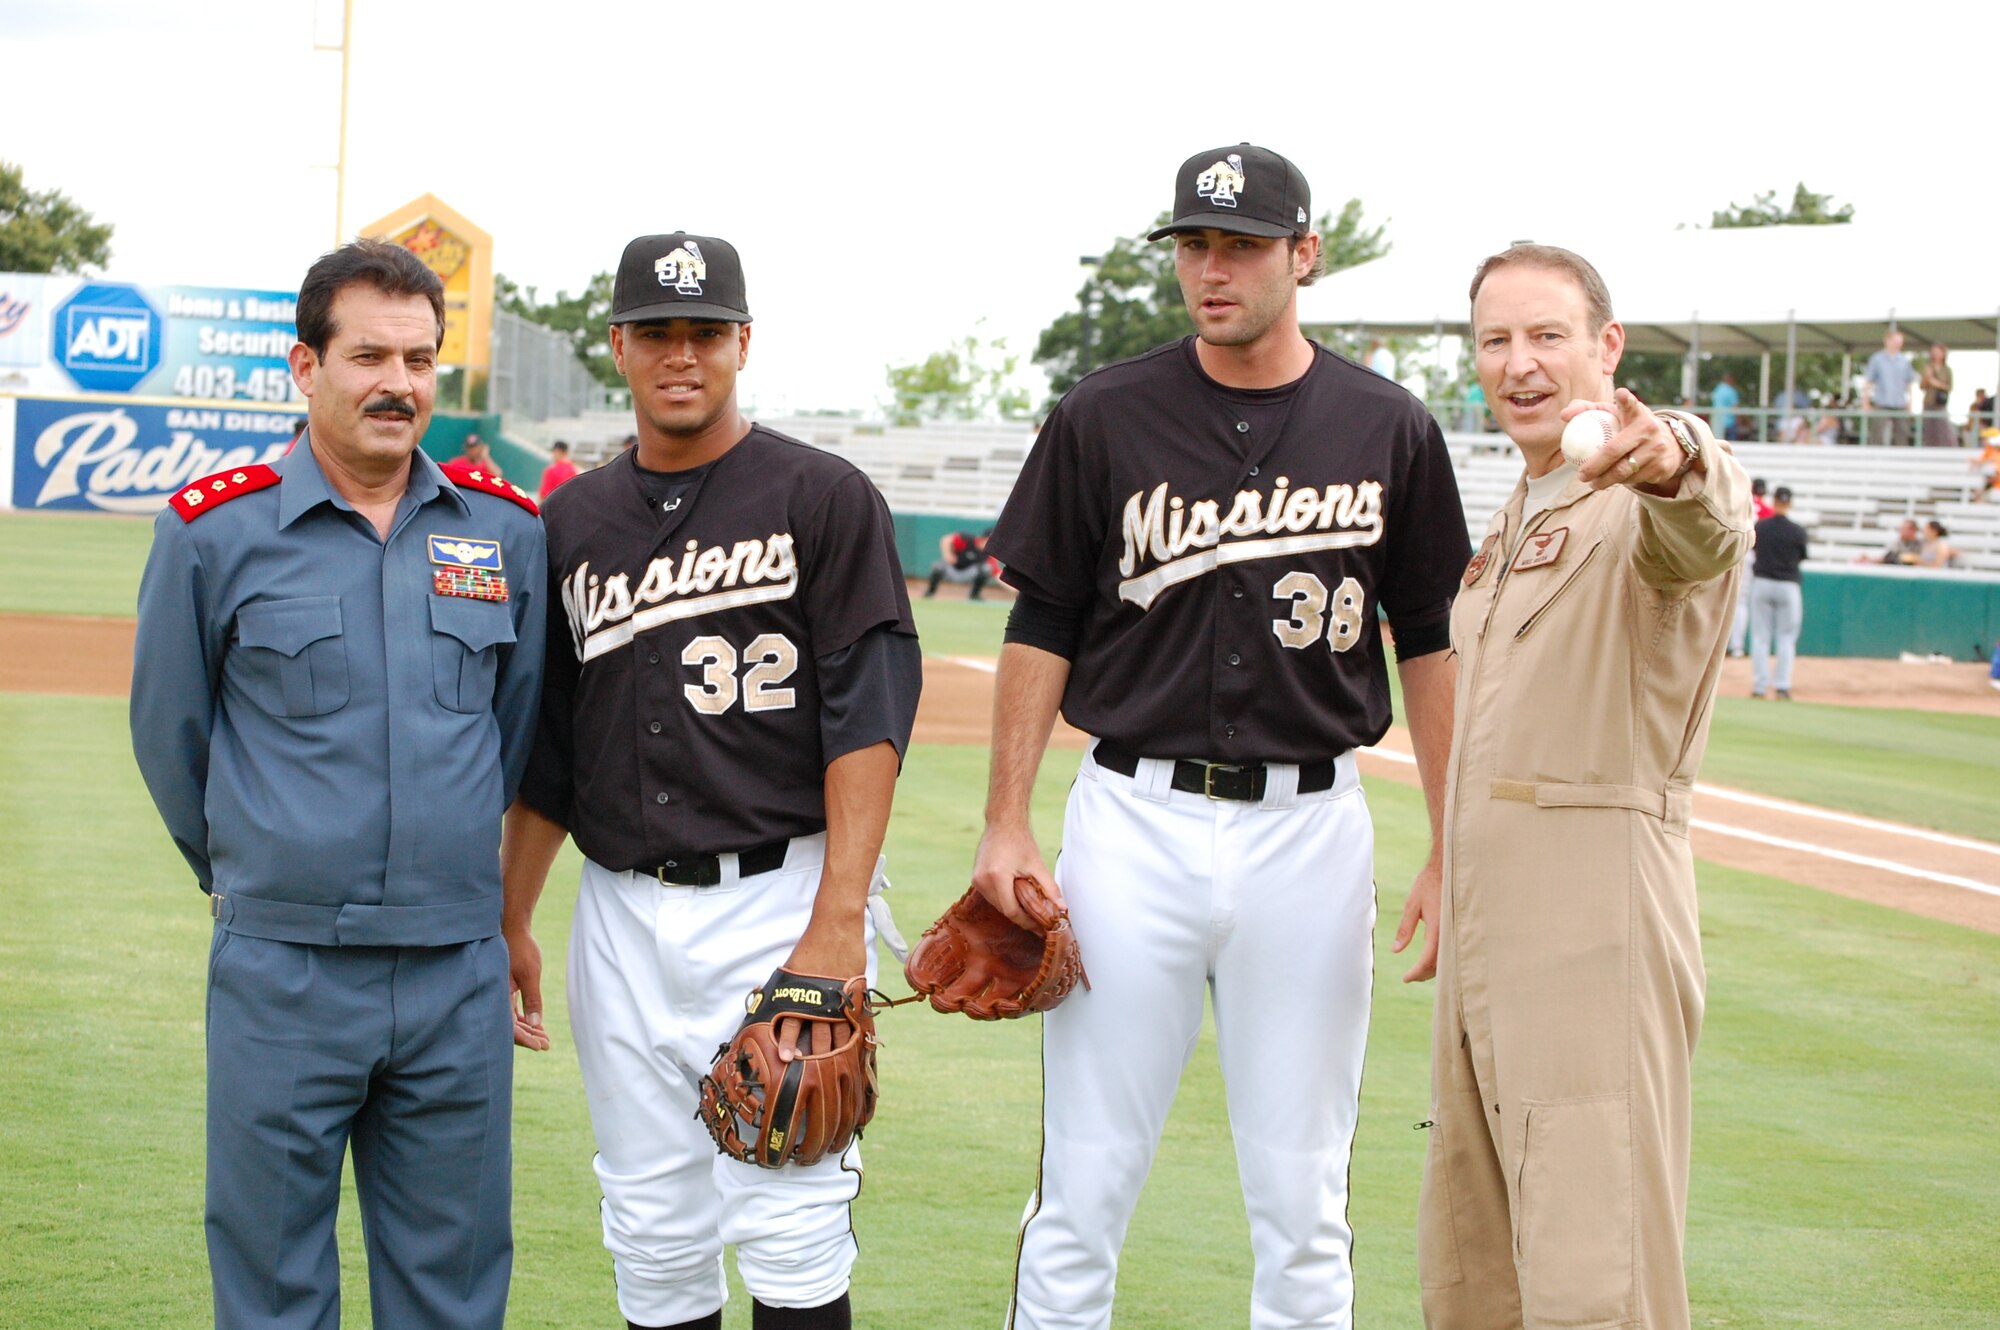 From left to right, Maj. Gen. Mohammad Dawran, Afghan National army air corps, Missions 2nd Baseman Jorge Minyeti, Missions Pitcher Craig Italino and Brig. Gen. Michael Boera, Coalition Air Power Transition Force commanding general, pose for a photo after throwing out the dual-first pitch of the game at Wolf Stadium May 23 in San Antonio, Texas. General Dawran is visiting Air Education and Training Command to receive updated information on current and future security assistance and cooperation training for the ANAAC. General Boera is working to stand up a robust ANAAC center of excellence and he is exploring more in-depth maintenance training between the two nations. Since the establishment of the Kabul Air Corps Training Center in 2007, in Afghanistan, more than 1,100 Afghani military members have received training in air corps orientation, air traffic control, fire fighting, aircraft maintenance, loadmaster duties and gunner training. (U.S. Air Force photo/Master Sgt. Paul Kilgallon)